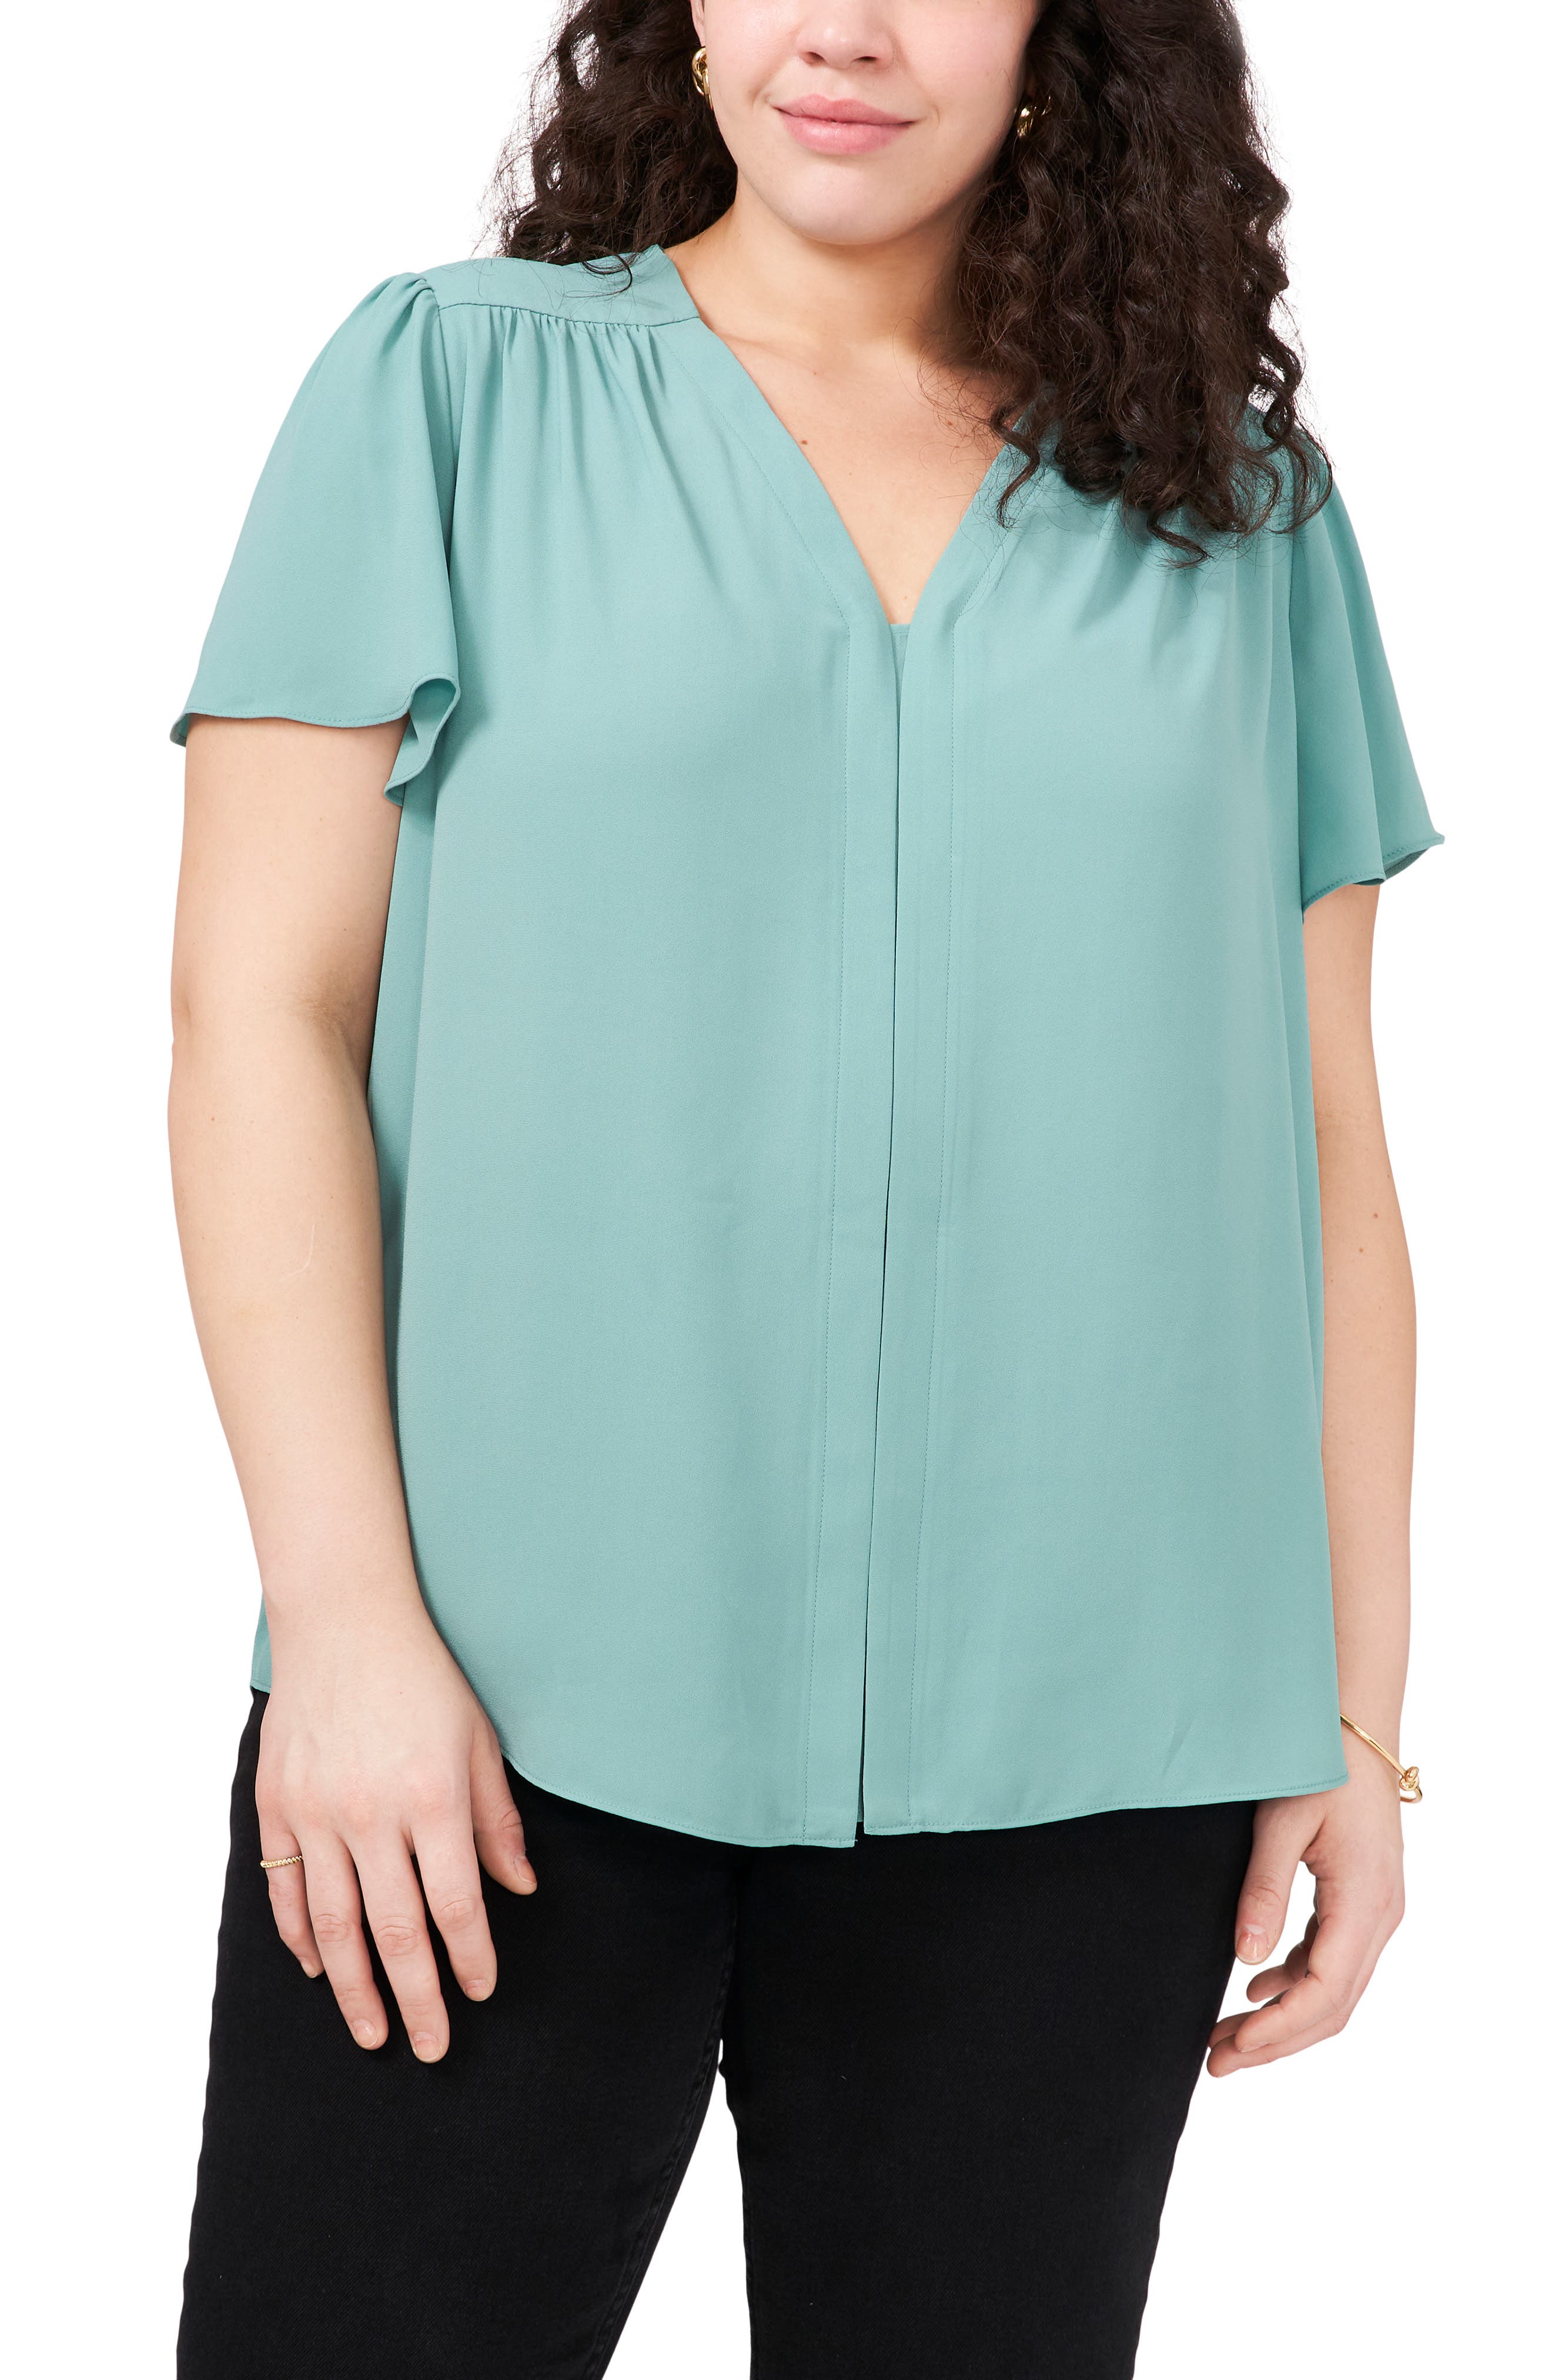 Ladies Womens Plus Size Turquoise Long  Pleated Top New UK 16 Blue New